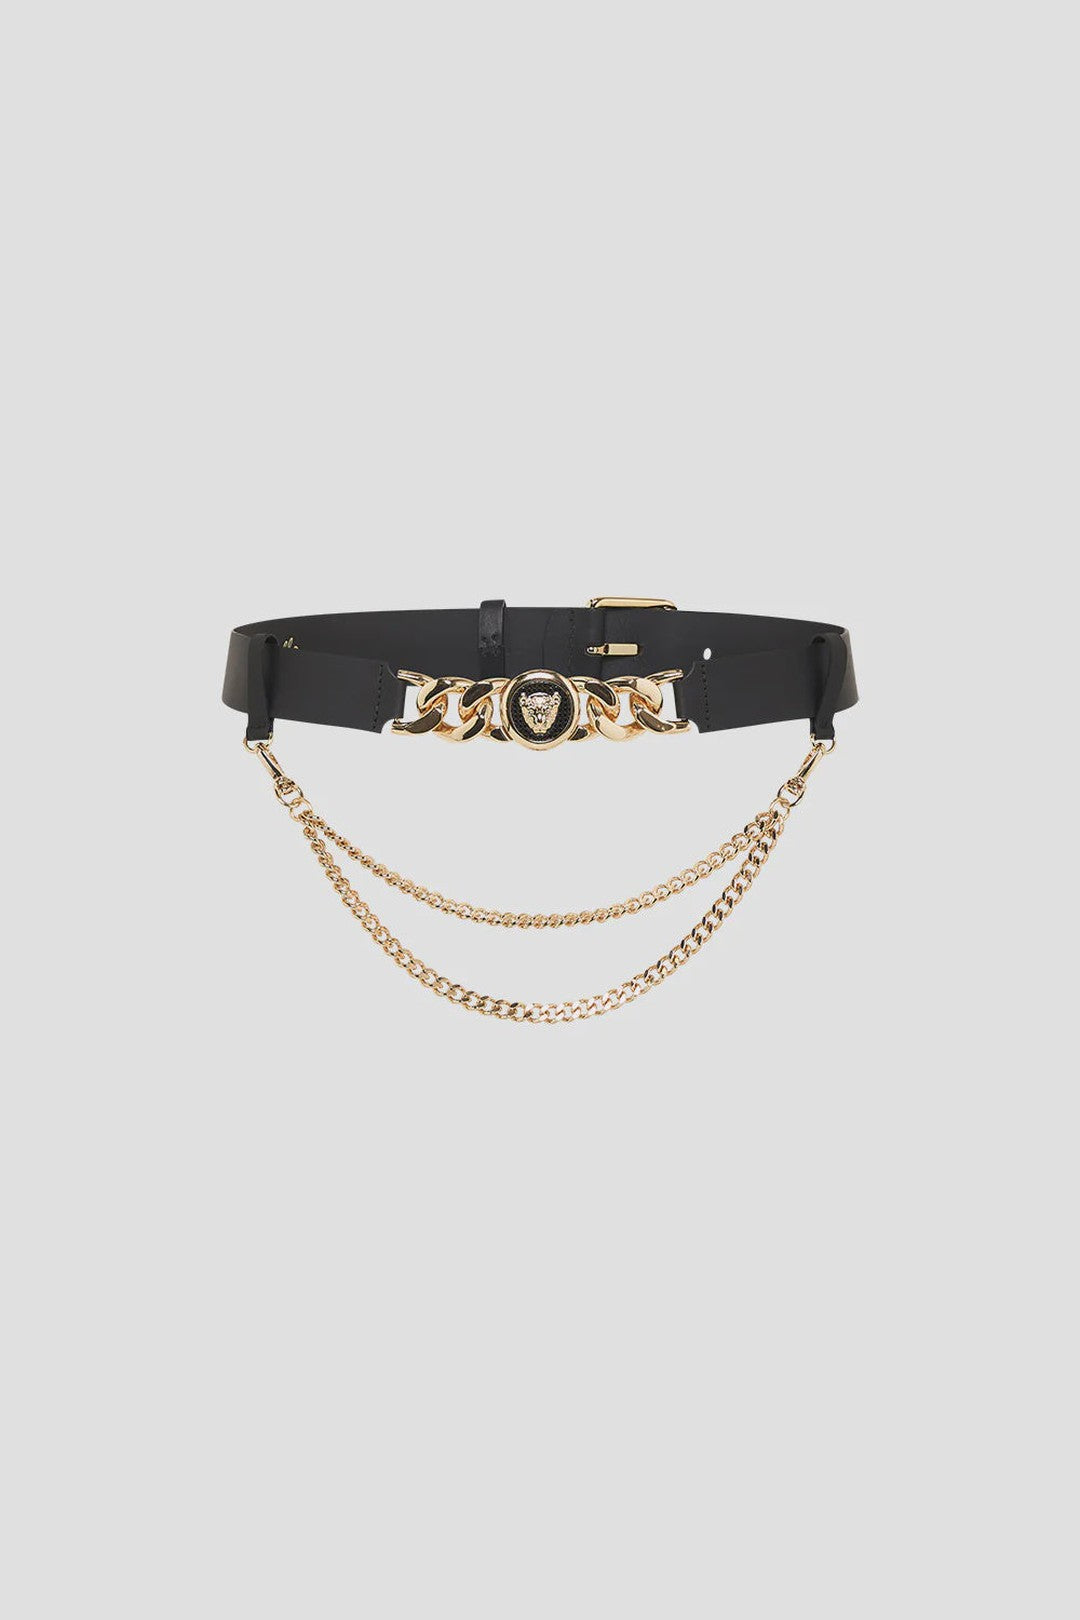 Leopard Button Belt With Chains, Solid Black